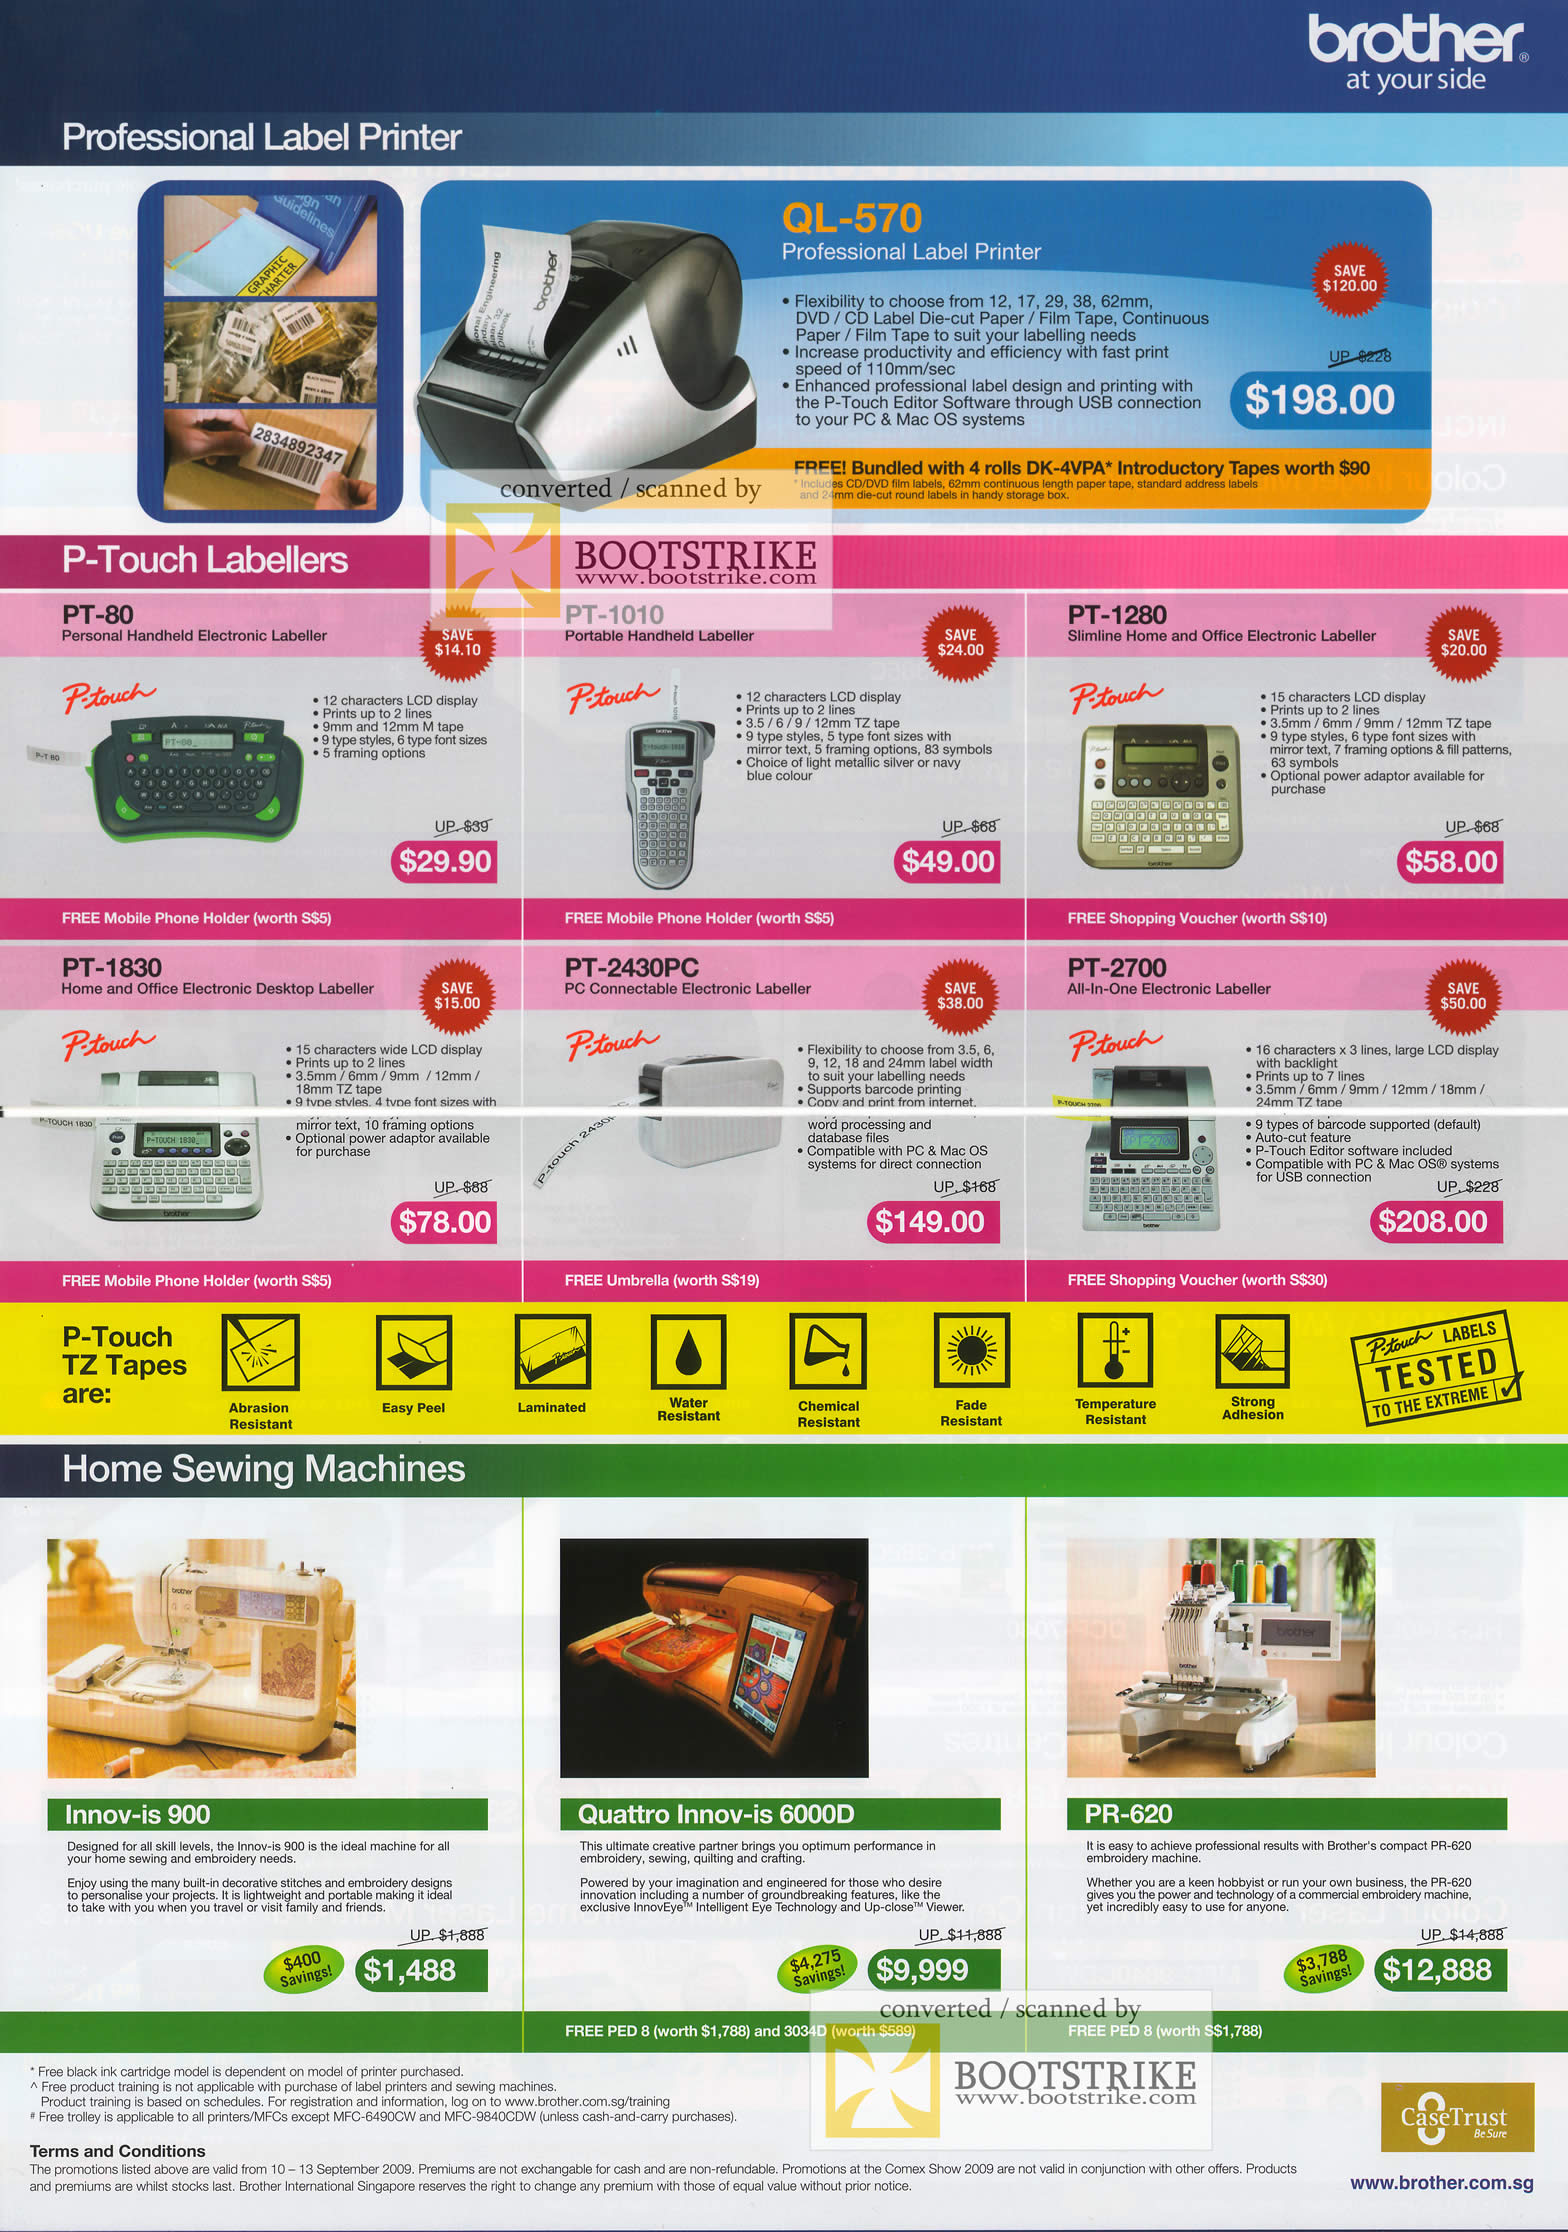 Comex 2009 price list image brochure of Brother Professional Label Printer P-Touch Labellers Home Sewing Machines